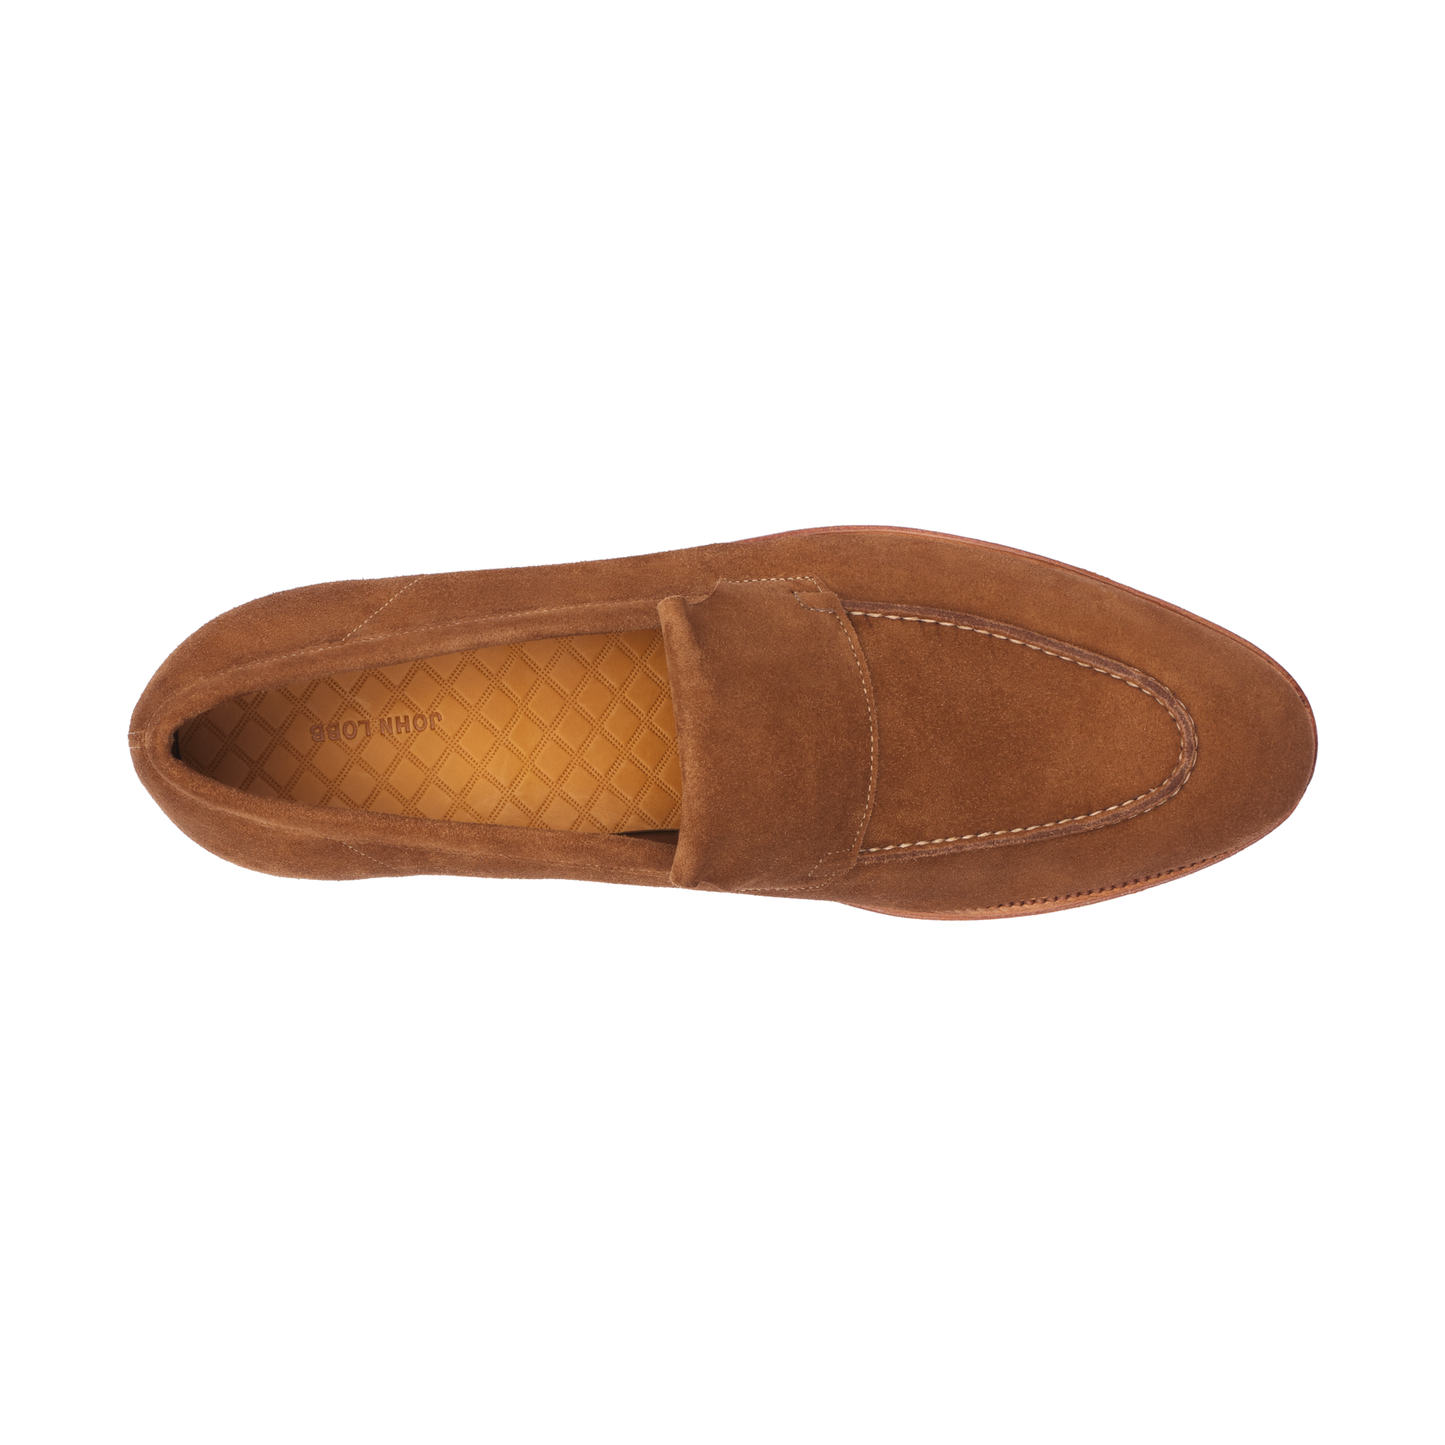 "Aley" Suede Loafer with Hand-Stitched Apron in Brown